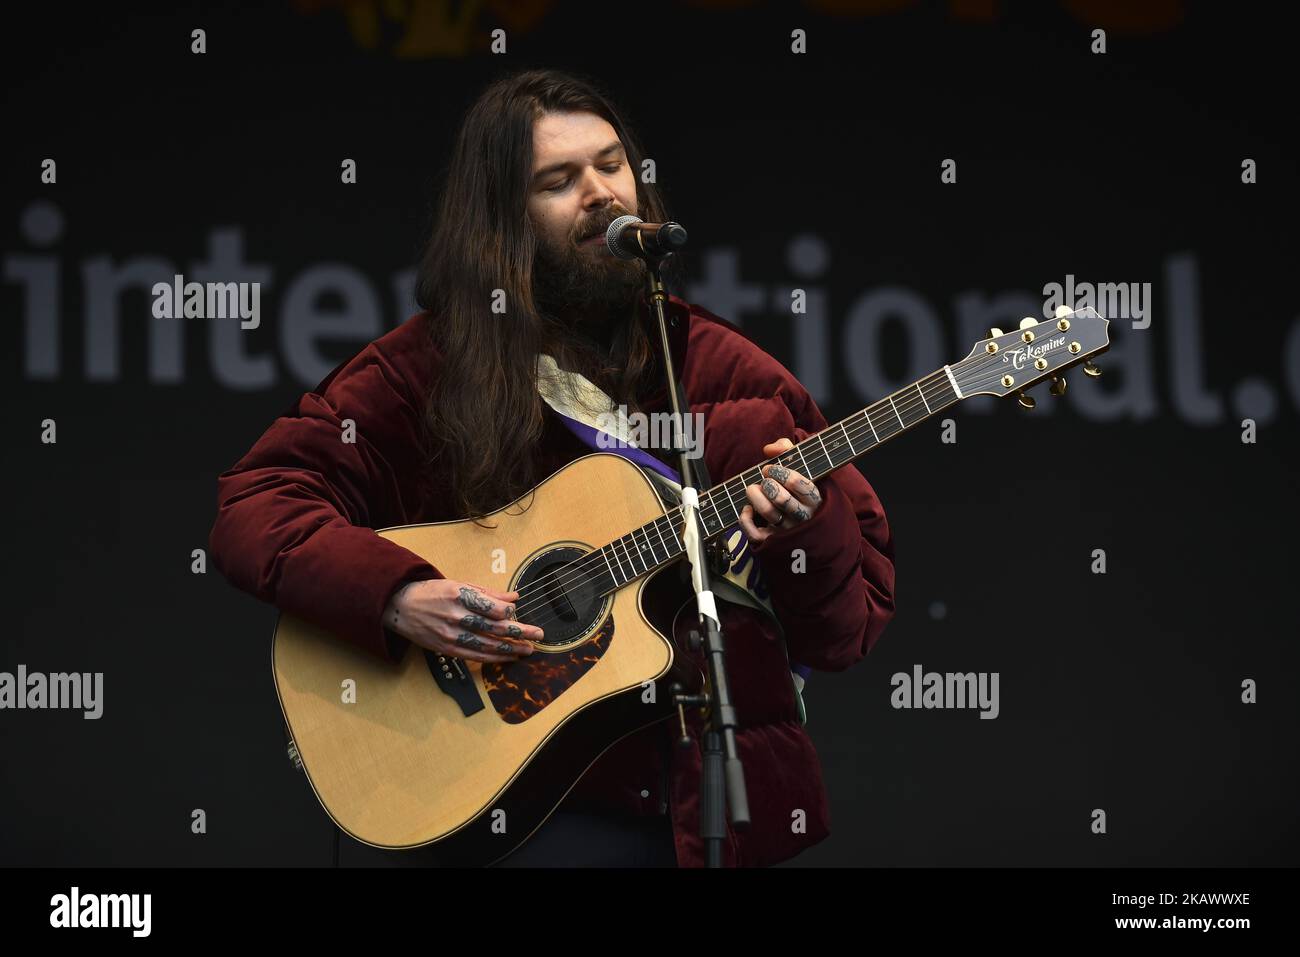 James Johnston of Scottish rock band Biffy Clyro performs on stage at the March4Women, London on March 4, 2018. Demonstrators march through central London with calls for an end to gender-based discrimination in the workplace. The event celebrates the upcoming International Women's Day, on March 8th, and marks 100 years since the first women in the UK gained the right to vote. (Photo by Alberto Pezzali/NurPhoto) Stock Photo